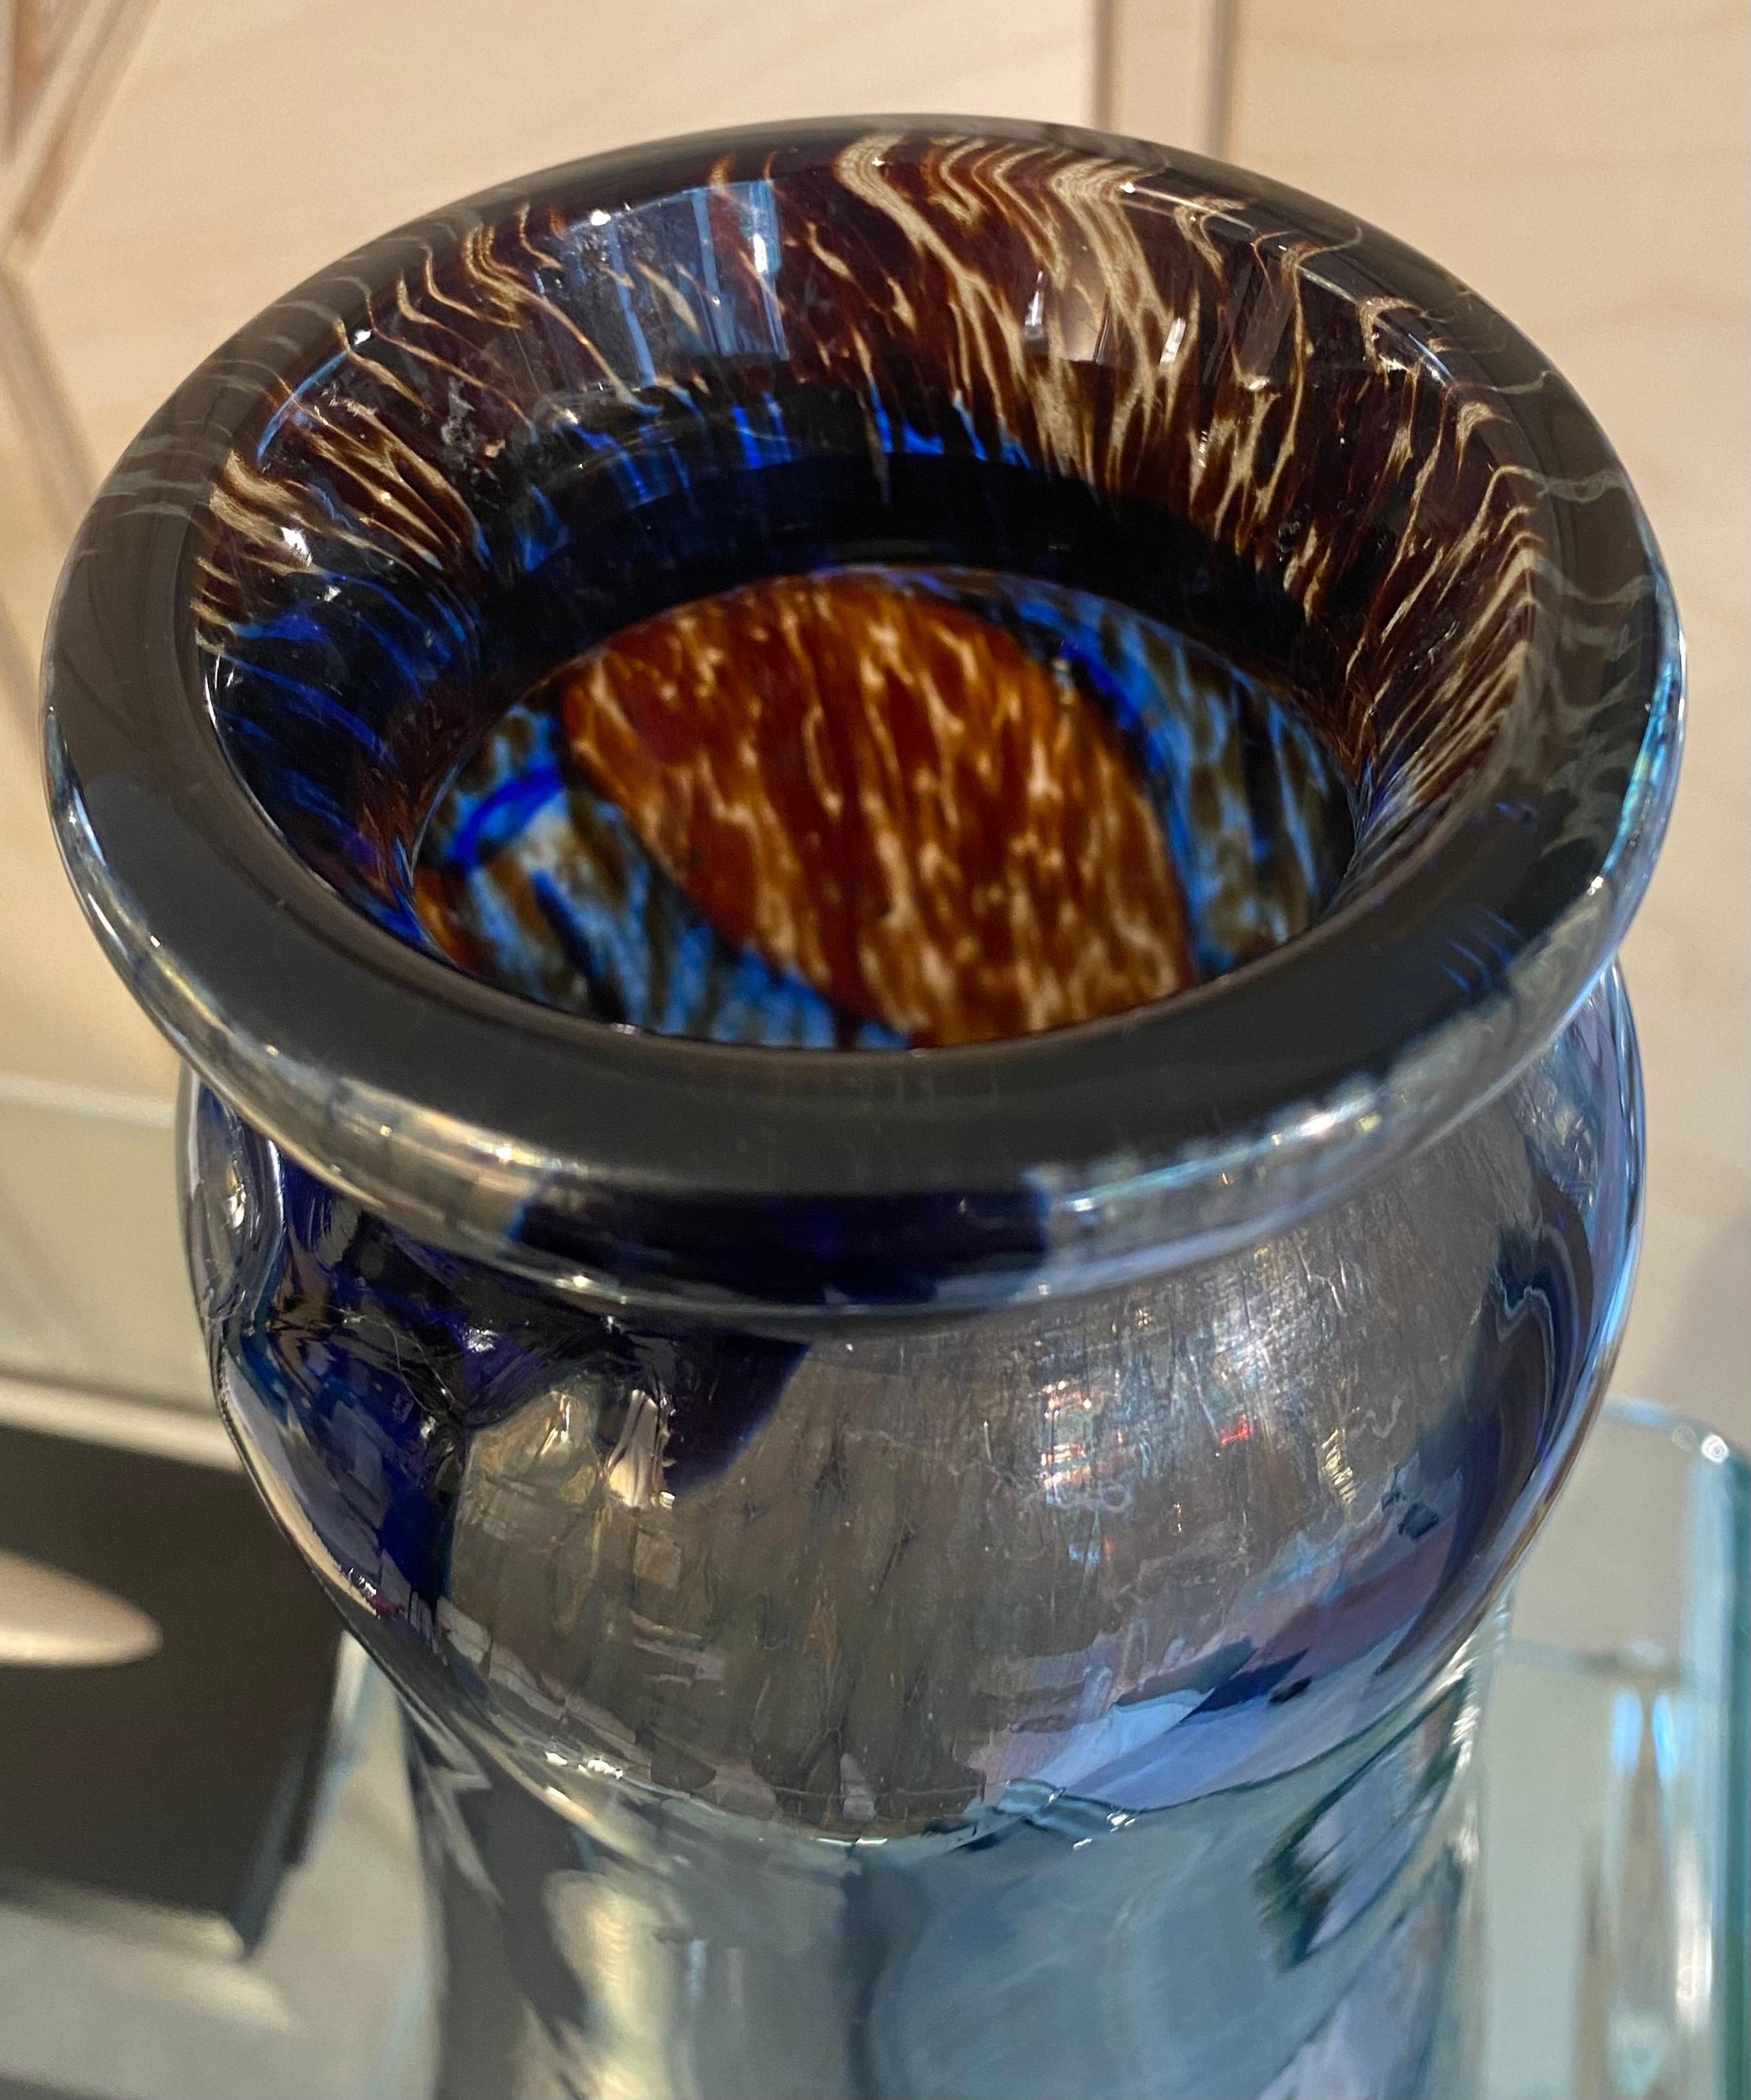 Glass Vase from Biot Signed Novaro and Dated on the Bottom of the Vase 1977 In Good Condition For Sale In Saint ouen, FR